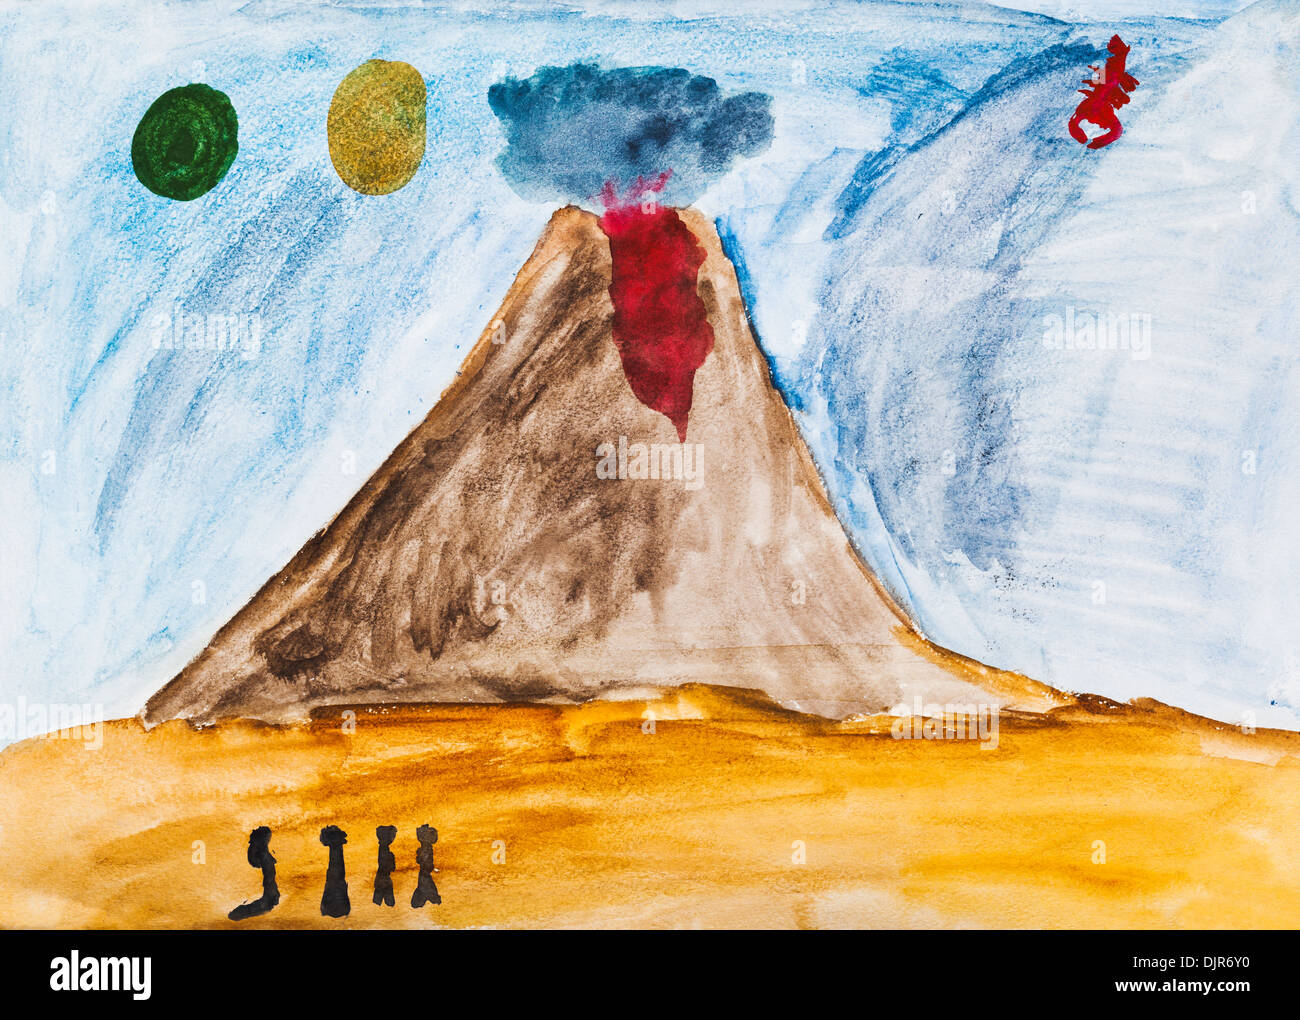 children drawing - people near active volcano in extraterrestrial world Stock Photo